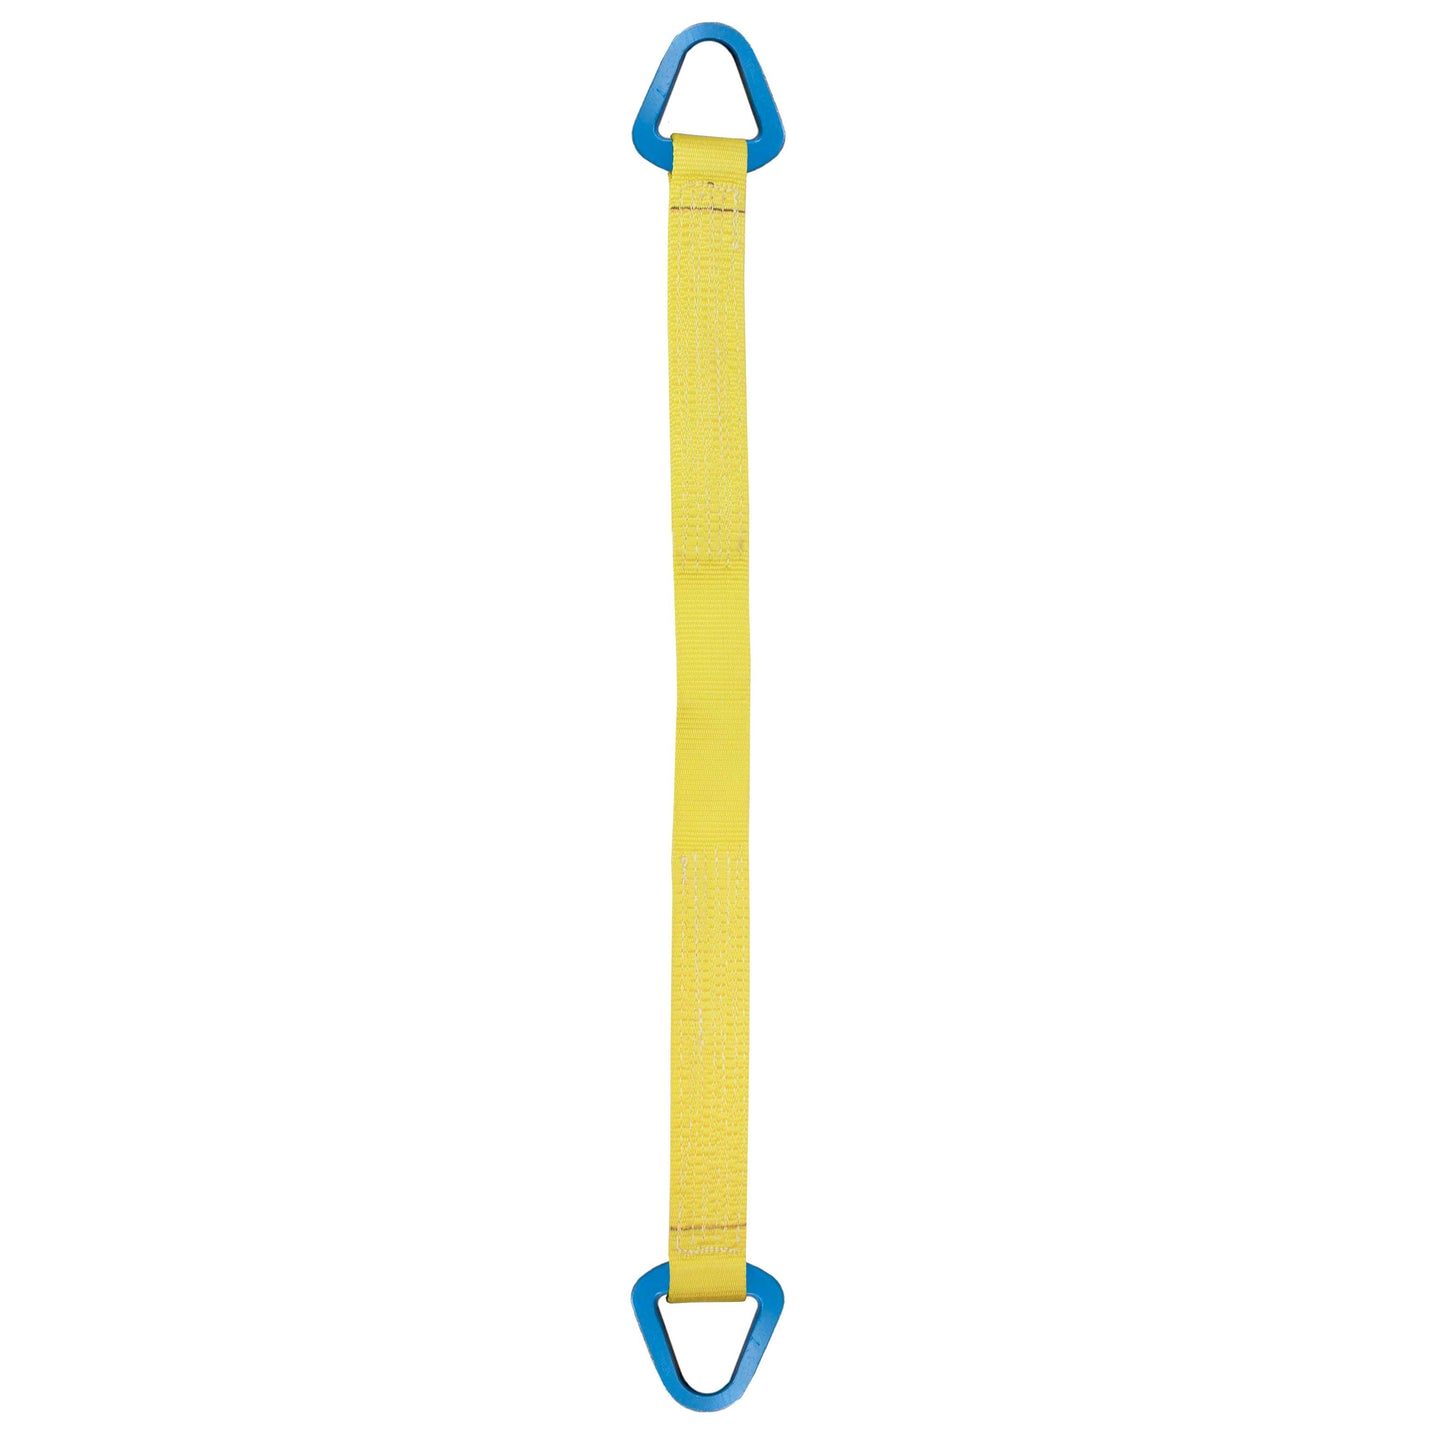 Nylon Lifting Sling Triangle 2 inch x 16 foot 2ply image 1 of 2